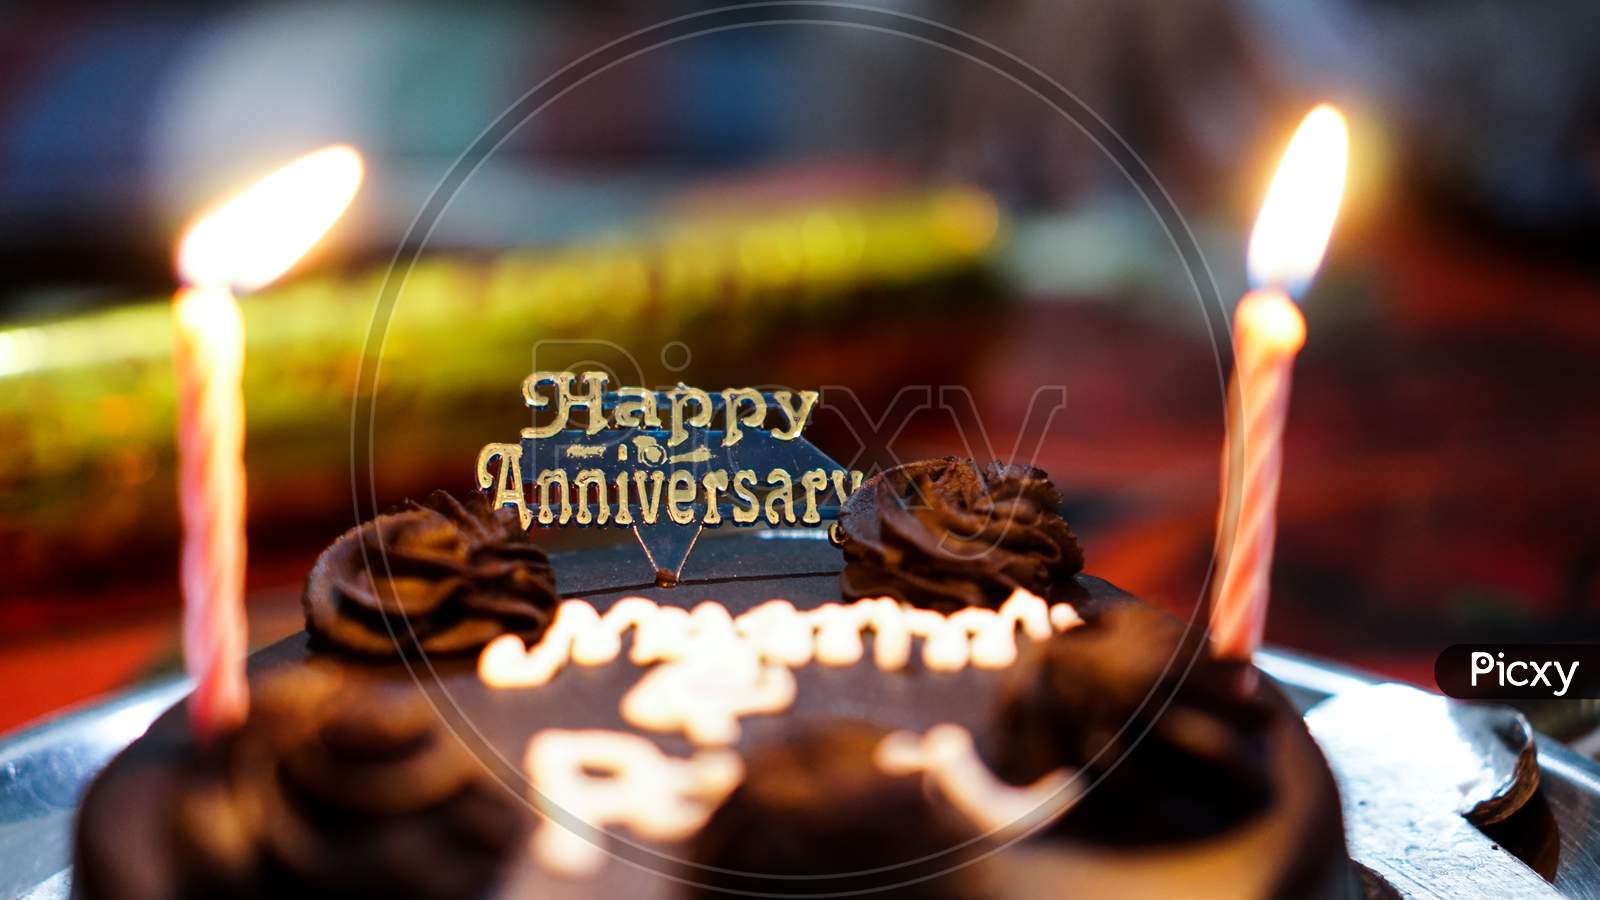 Celebrating Wedding Anniversary With Heart Shape Chocolate Cake. Stock  Photo, Picture And Royalty Free Image. Image 27408151.